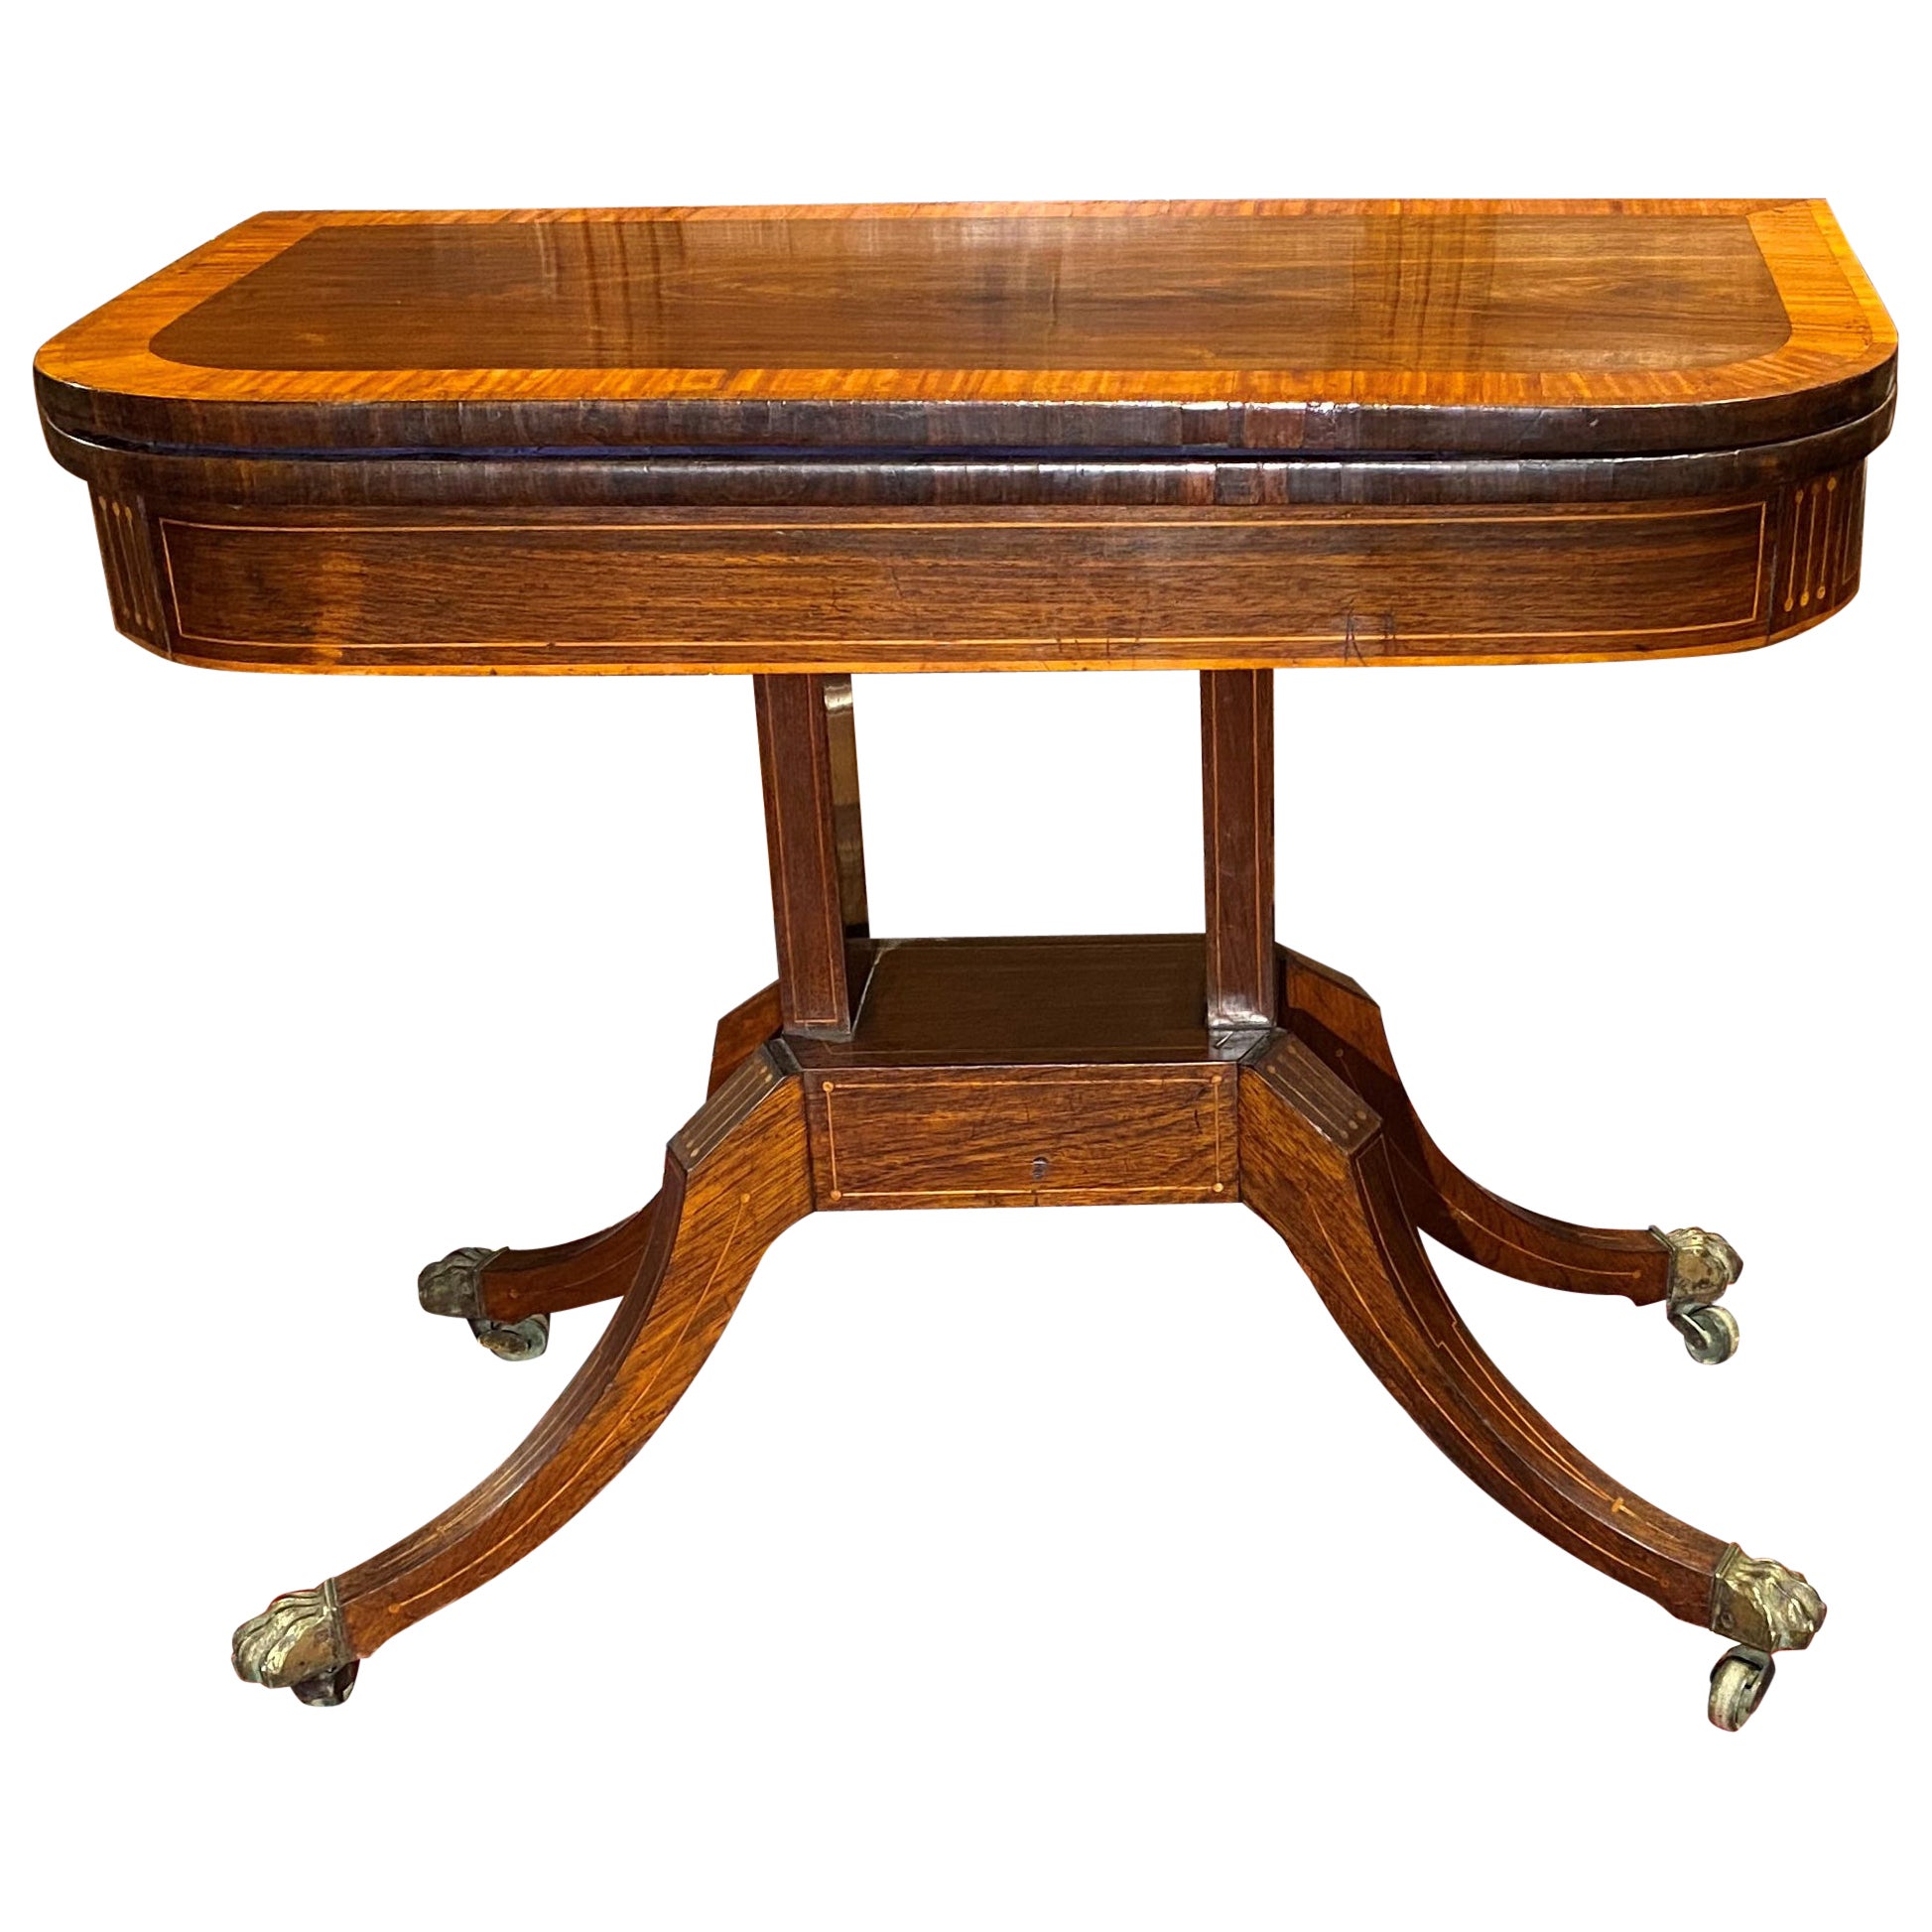 19th C Regency Banded Gaming Table in Rosewood with Baize Interior